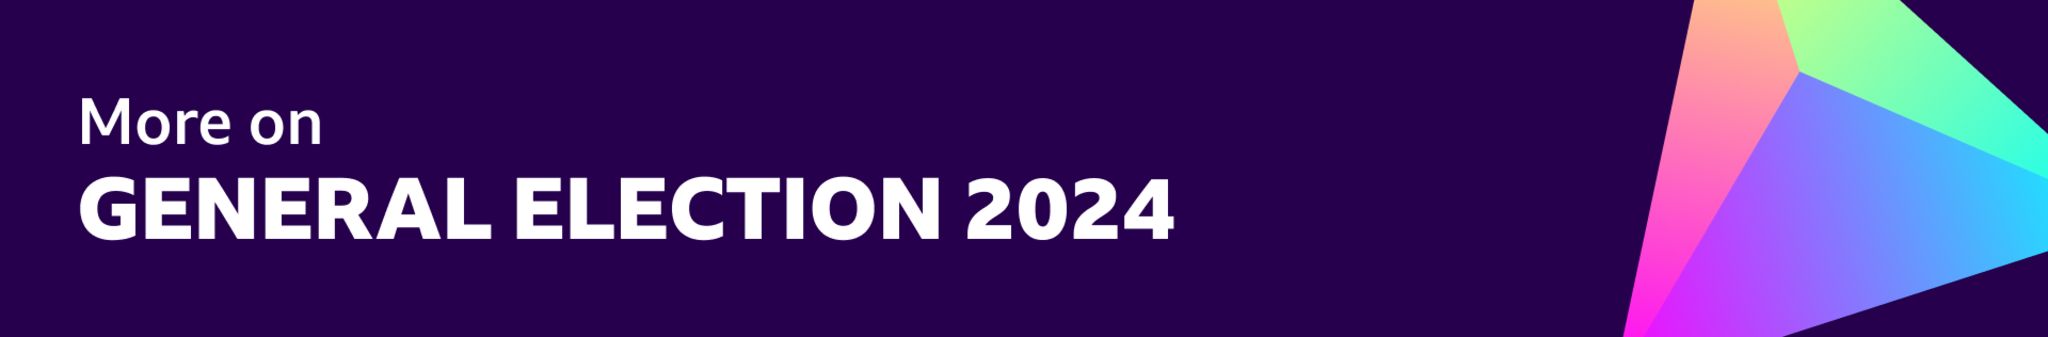 BBC general election branding on purple background, saying More on General Election 2024